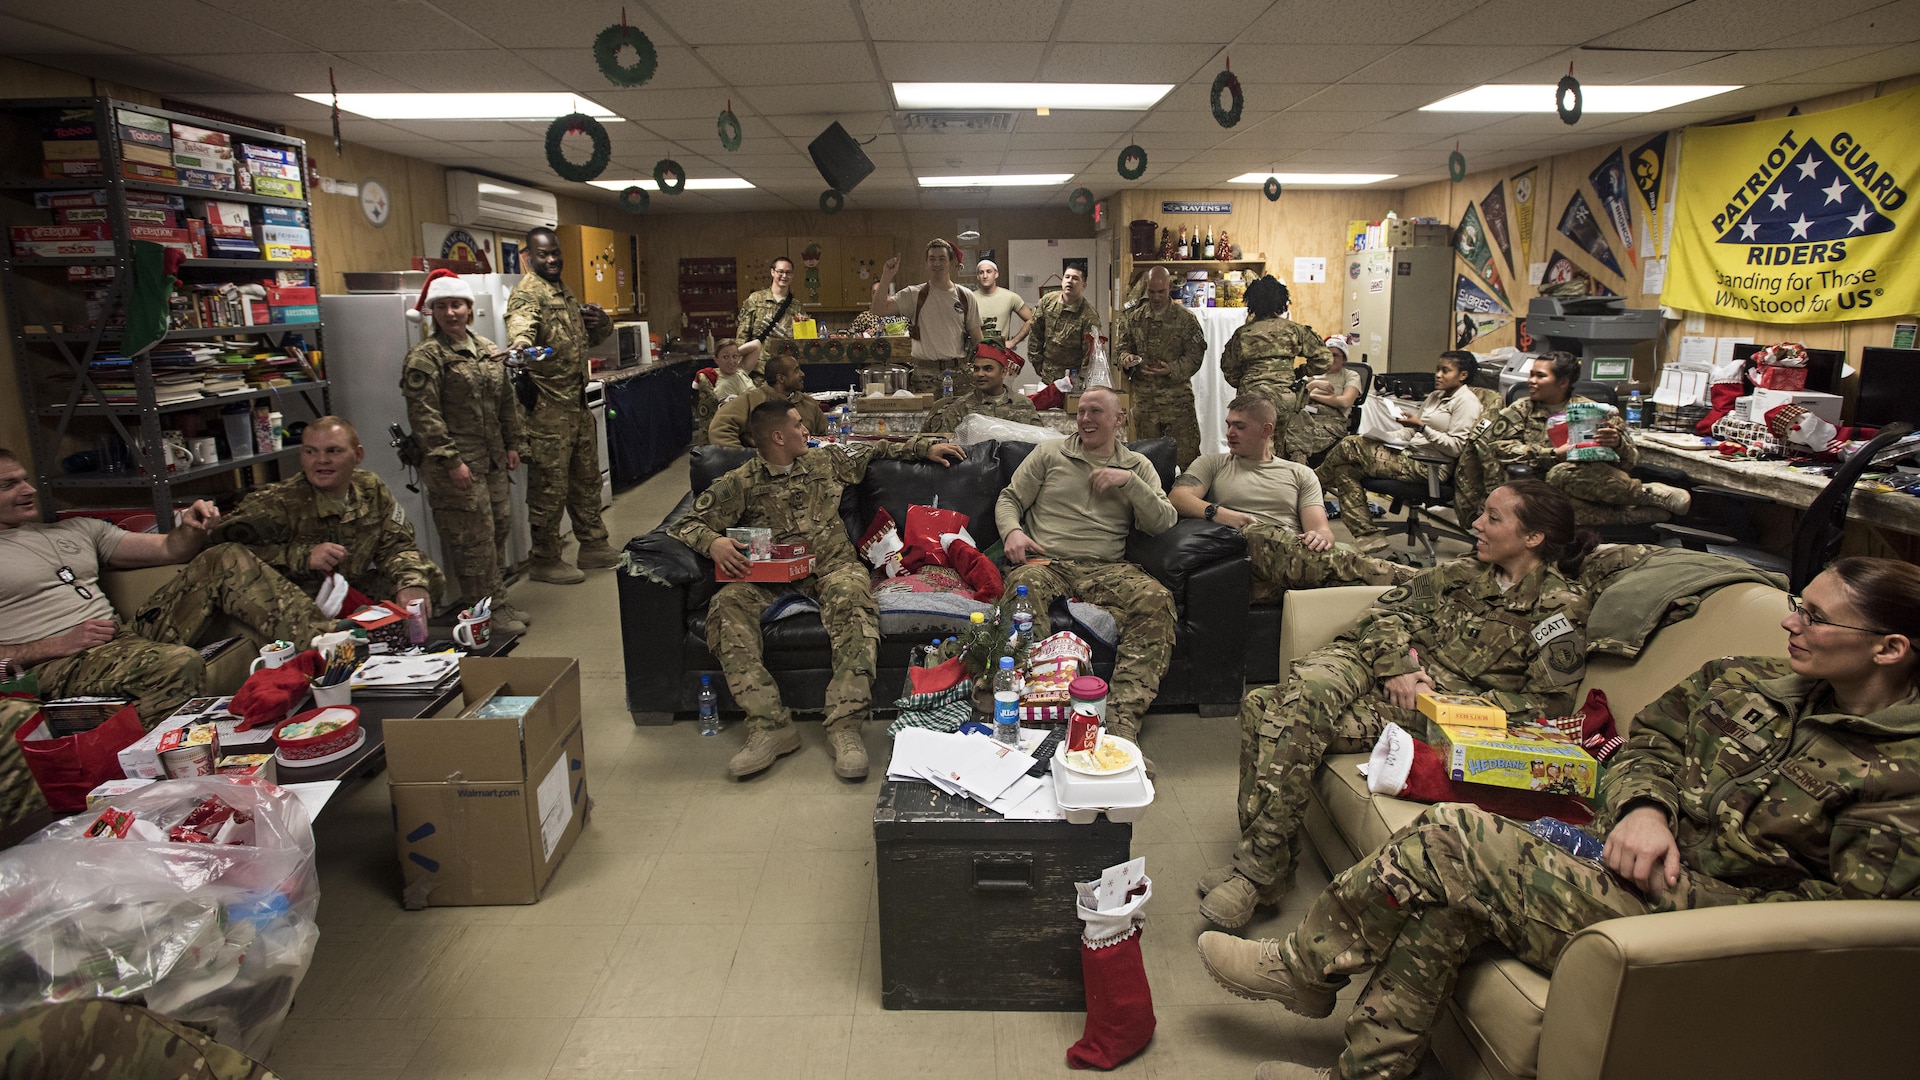 Members of the 455th Expeditionary Aeromedical Evacuation Squadron participate in a white elephant gift exchange Dec. 25, 2016 at Bagram Airfield, Afghanistan. The mission continued over the holiday, but service members took time to celebrate the holiday by talking with their families and spending time with their units. (U.S. Air Force photo by Staff Sgt. Katherine Spessa)